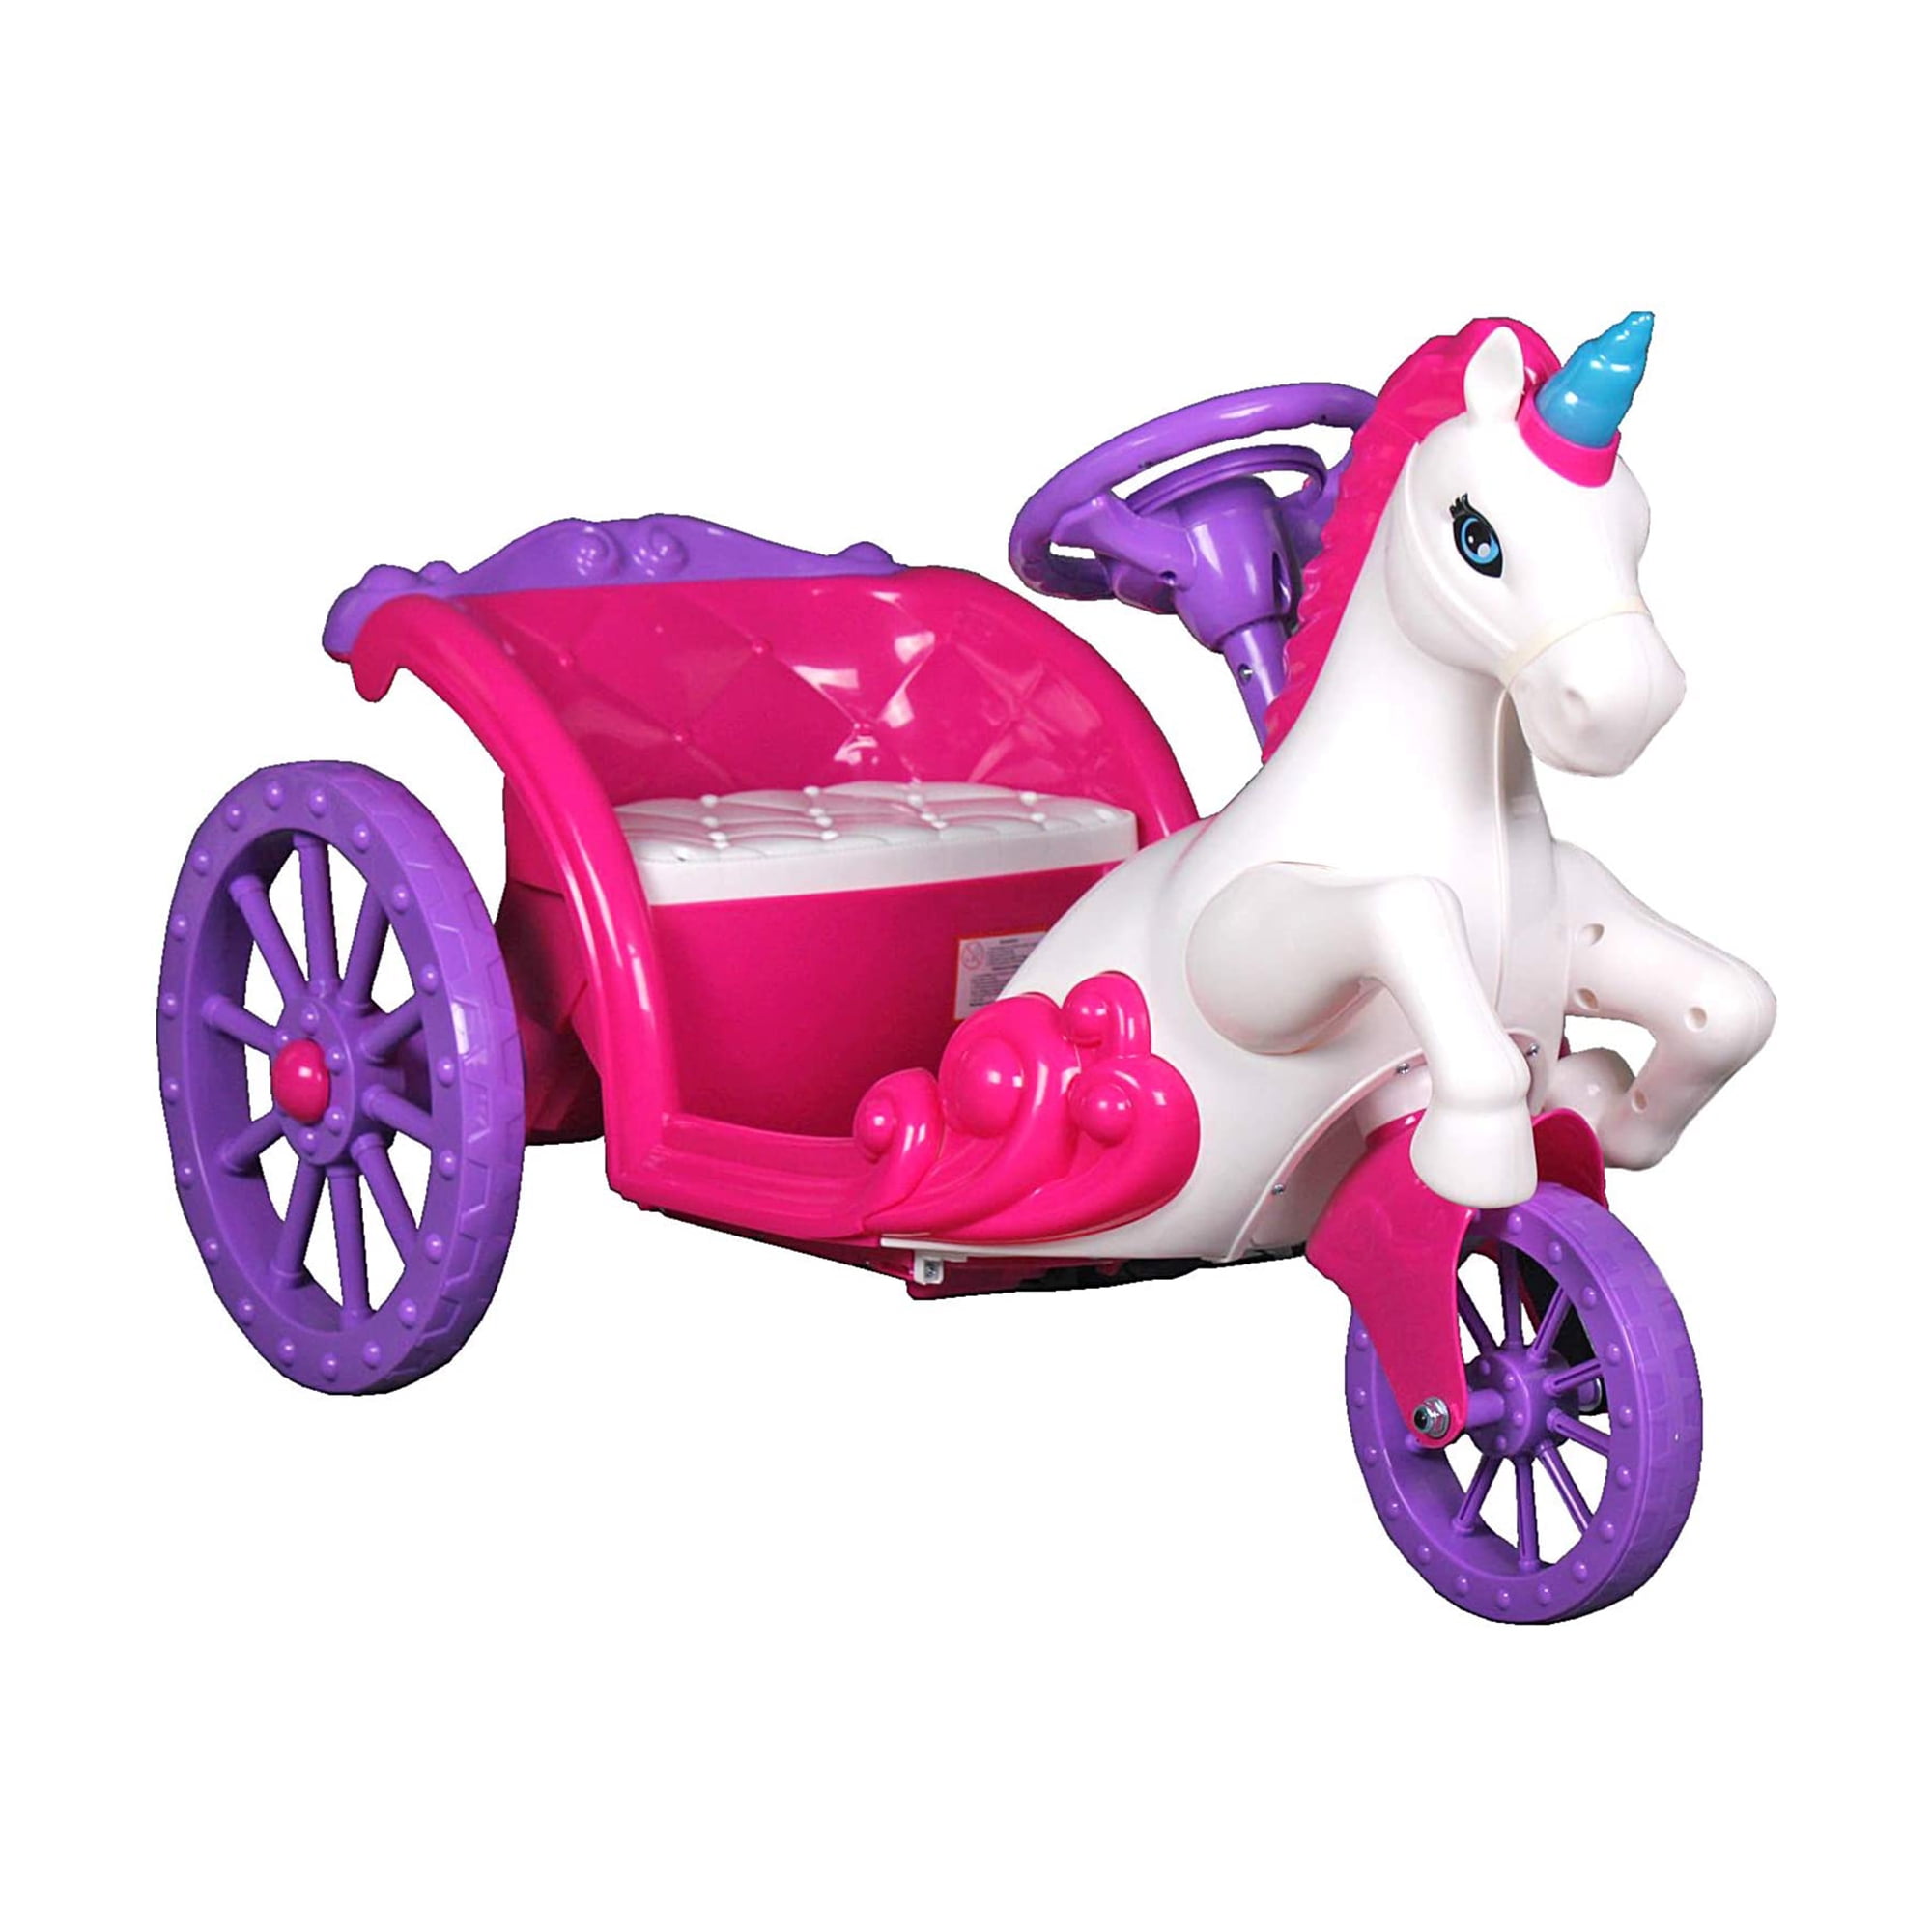 Disney Princess Royal Horse and Carriage Battery Powered 6 Volt Kids Ride-On Toy